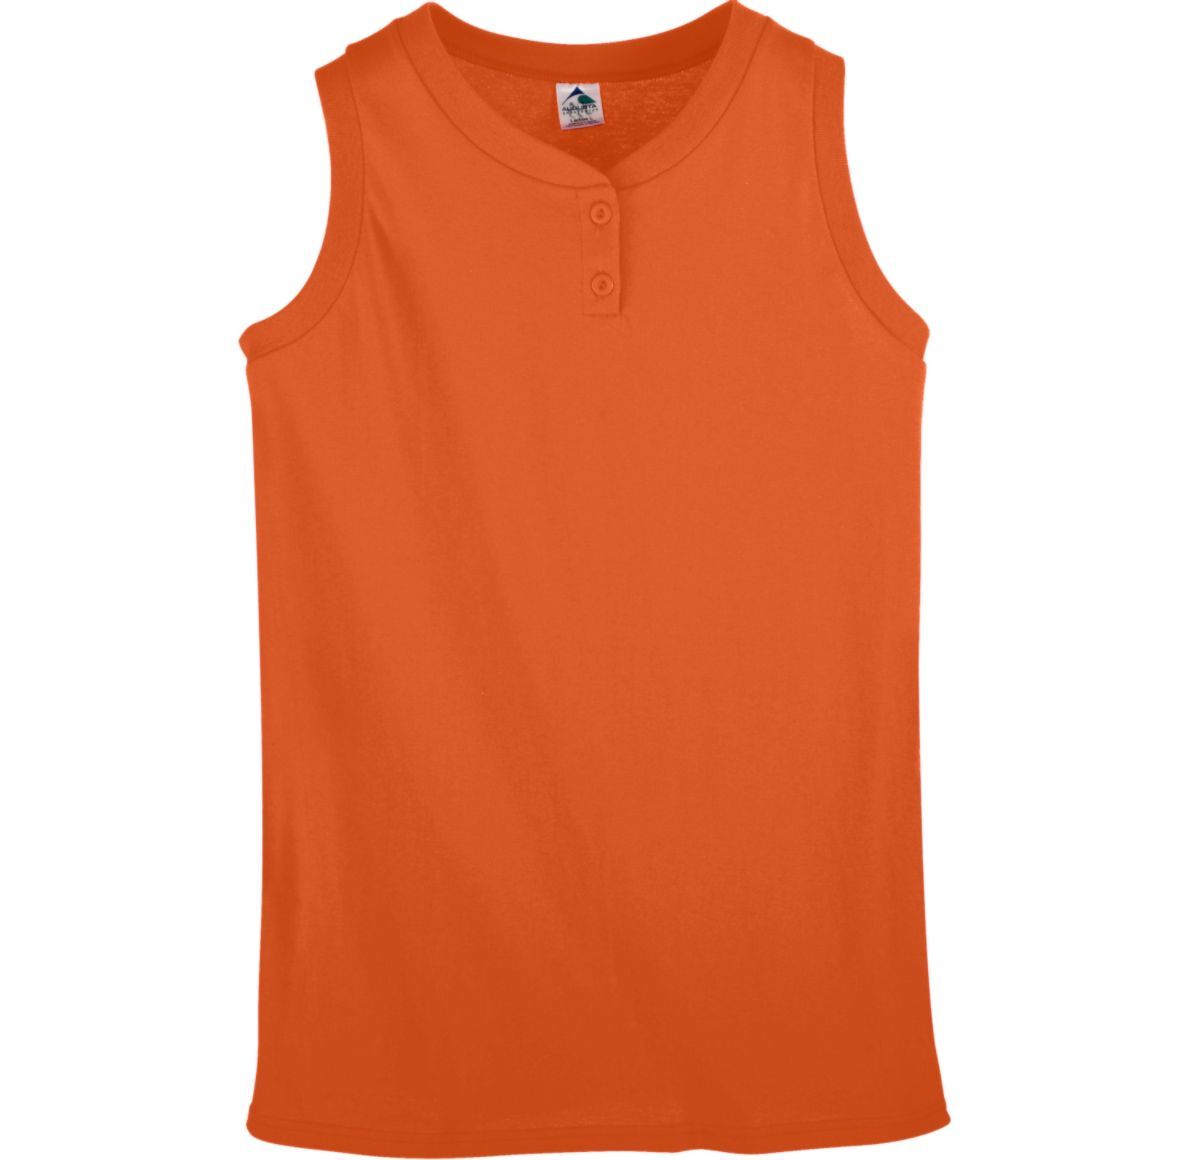 Augusta Sportswear Girls Sleeveless Two-Button Softball Jersey in Orange  -Part of the Girls, Augusta-Products, Softball, Girls-Jersey, Shirts product lines at KanaleyCreations.com